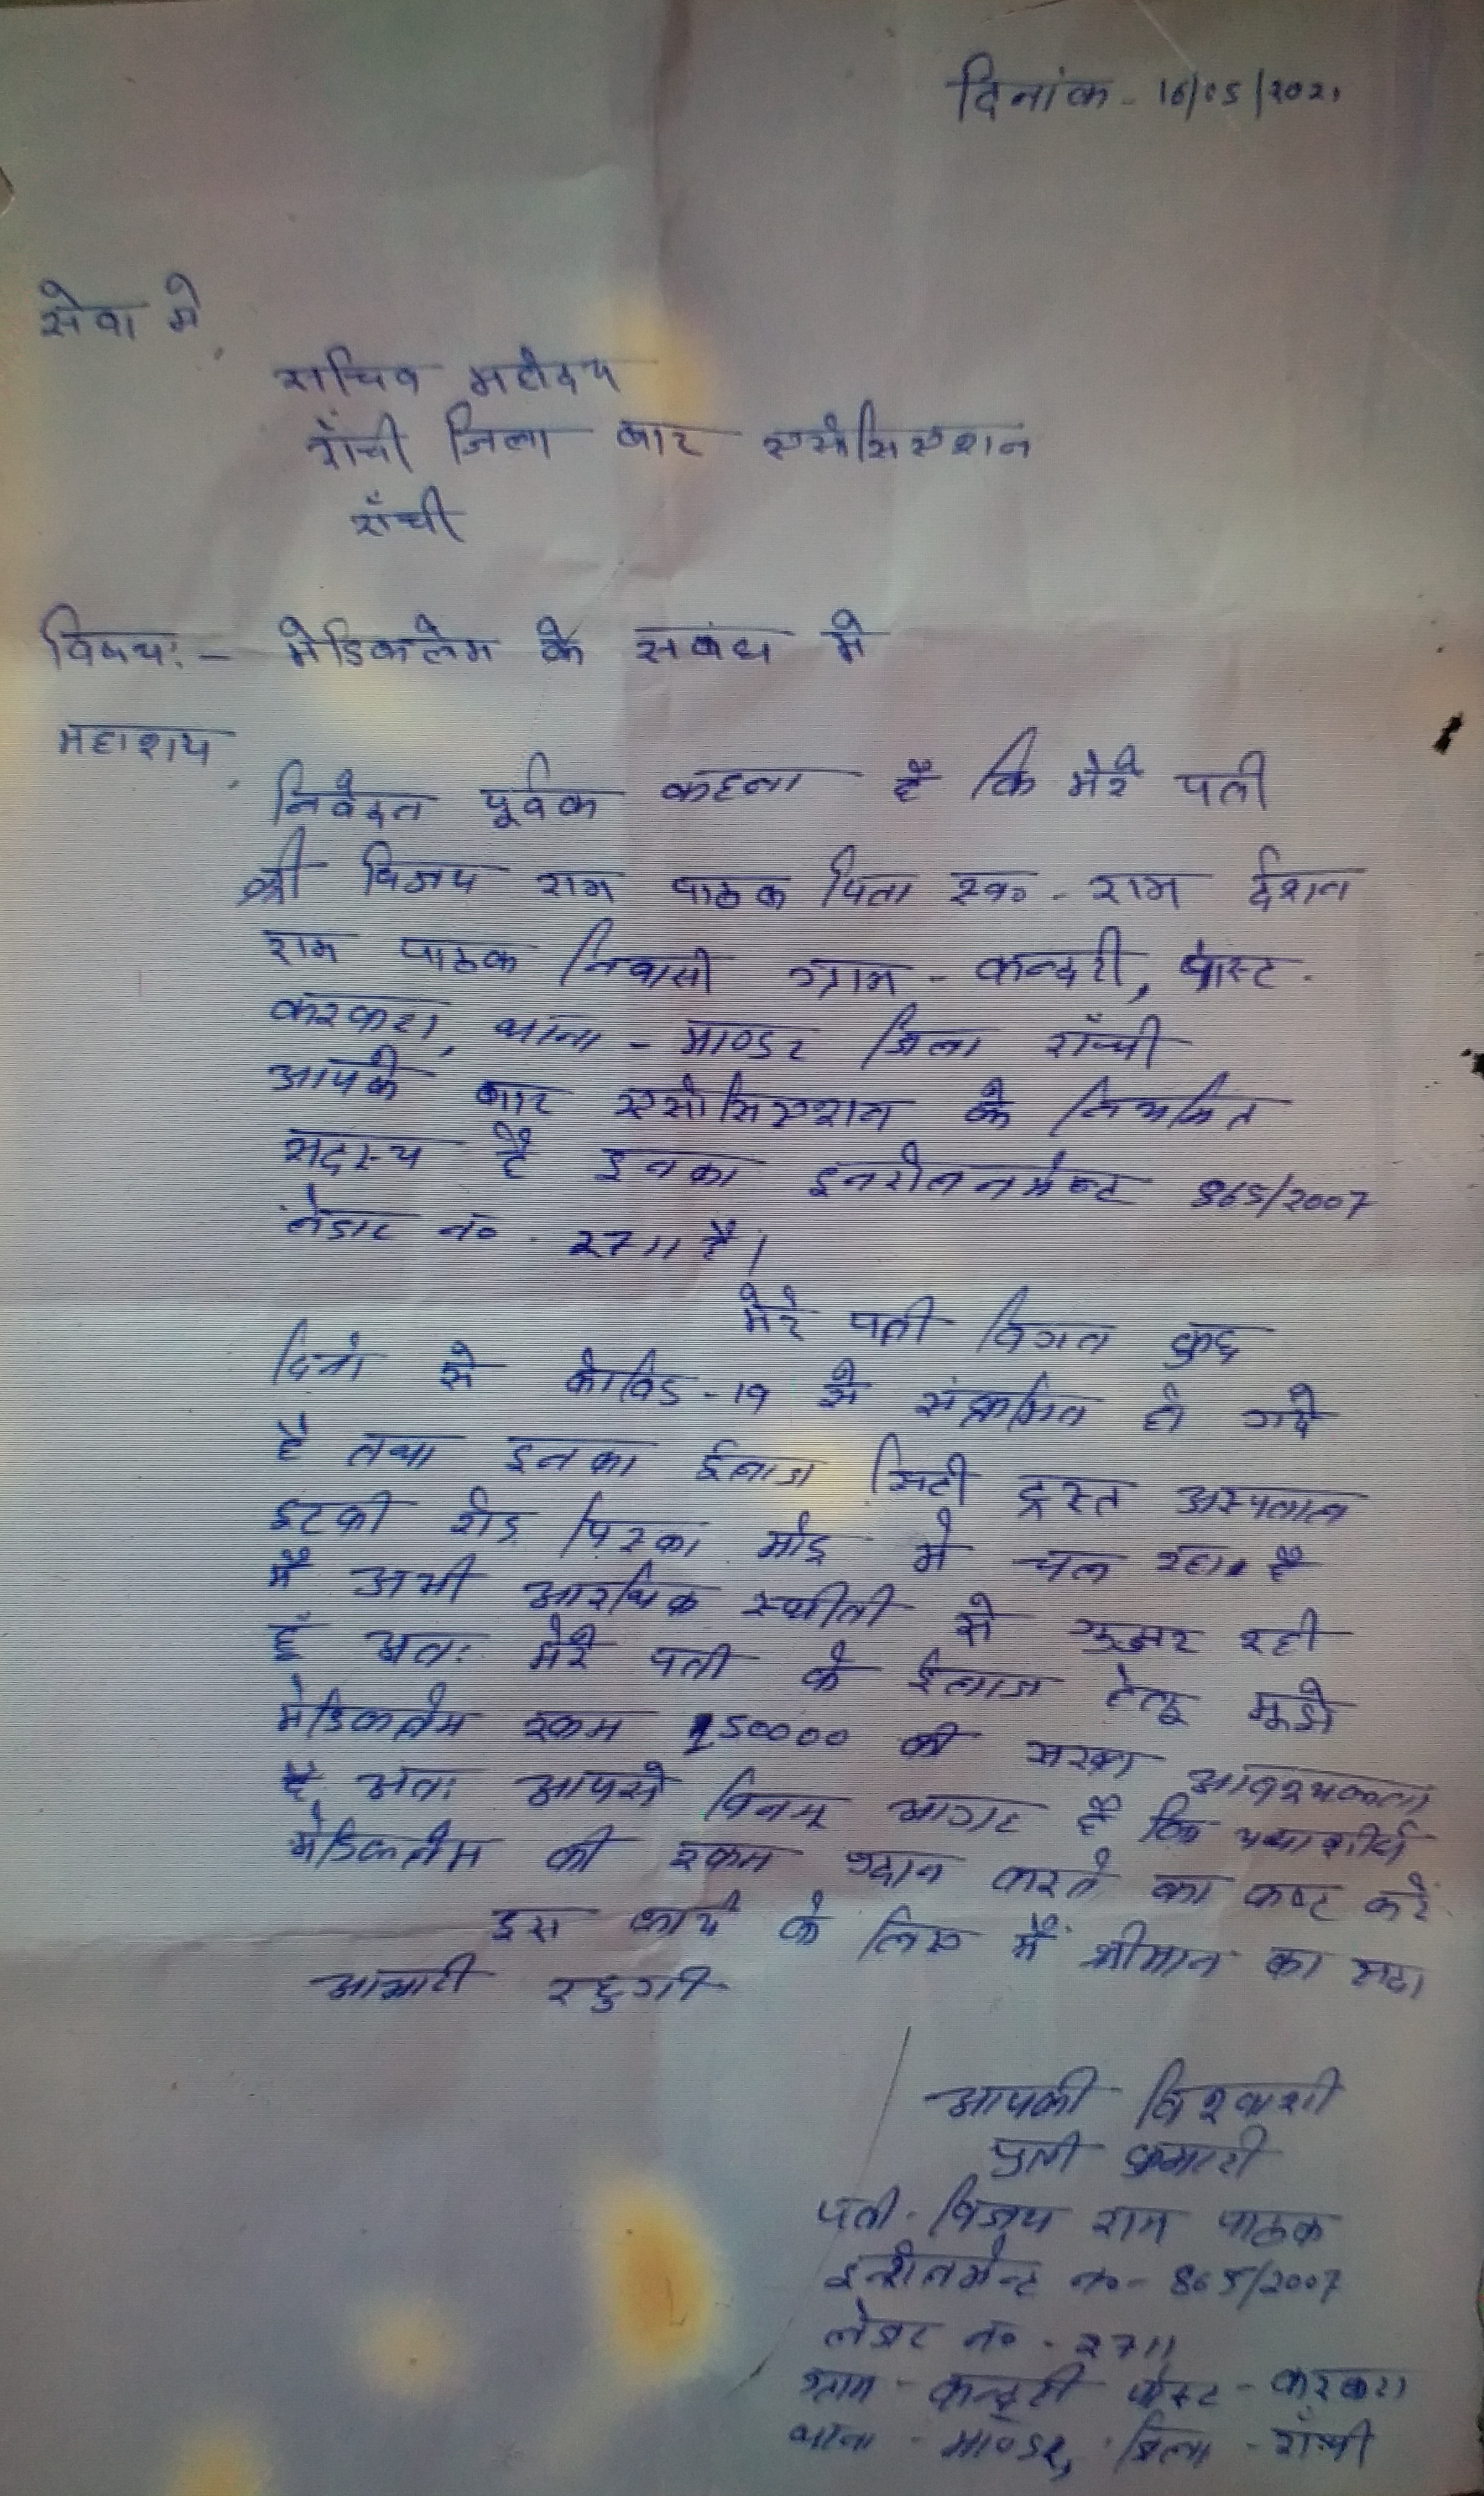 advocate vijays wife wrote a letter to district bar association for requesting help